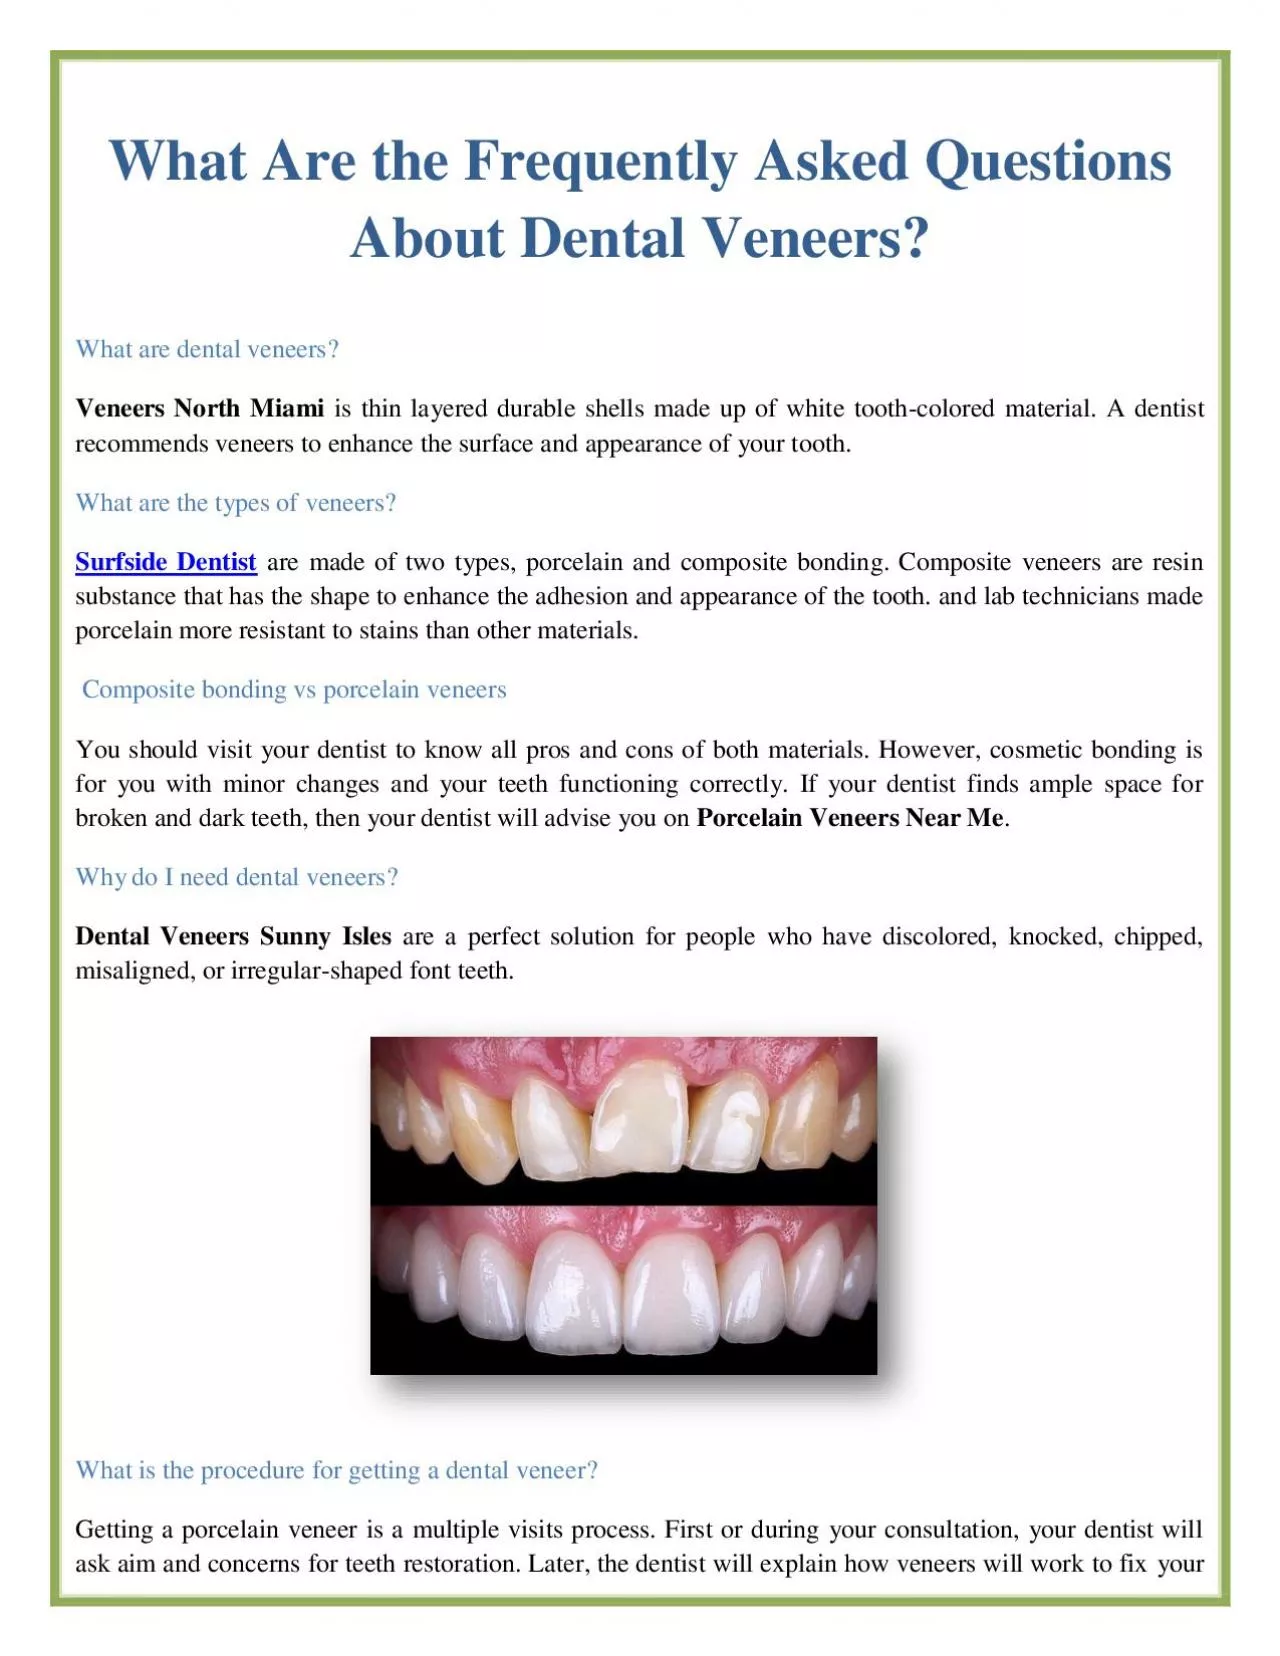 What Are the Frequently Asked Questions About Dental Veneers?